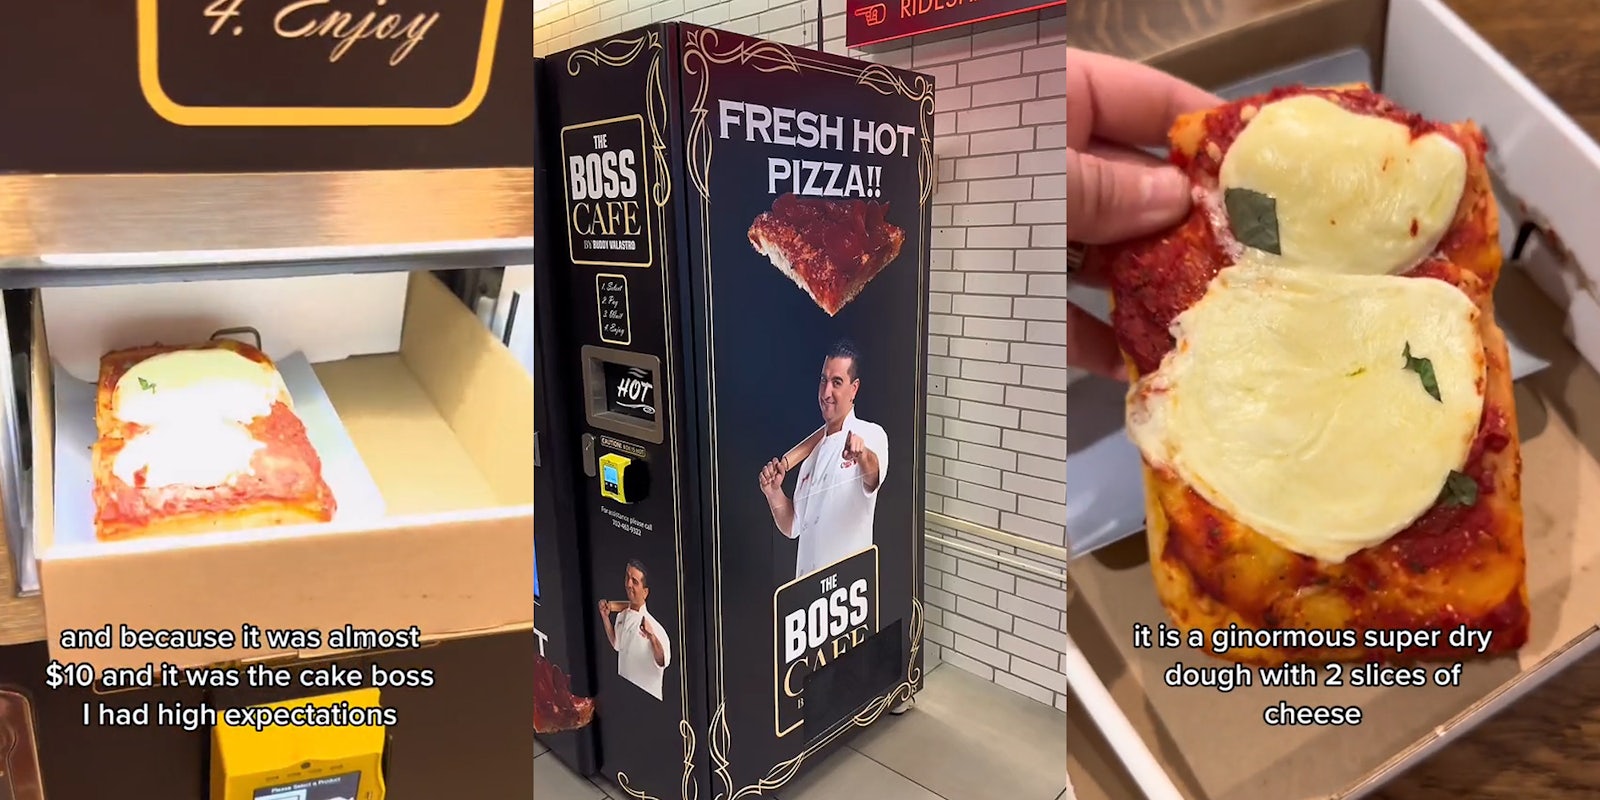 Pizza in cardboard tray coming from vending machine caption 'and because it was almost $10 and it was the cake boss I had high expectations' (l) Cake Boss pizza vending machine (c) woman hand holding pizza up over cardboard tray caption 'it is a ginormous super dry dough with 2 slices of cheese' (r)